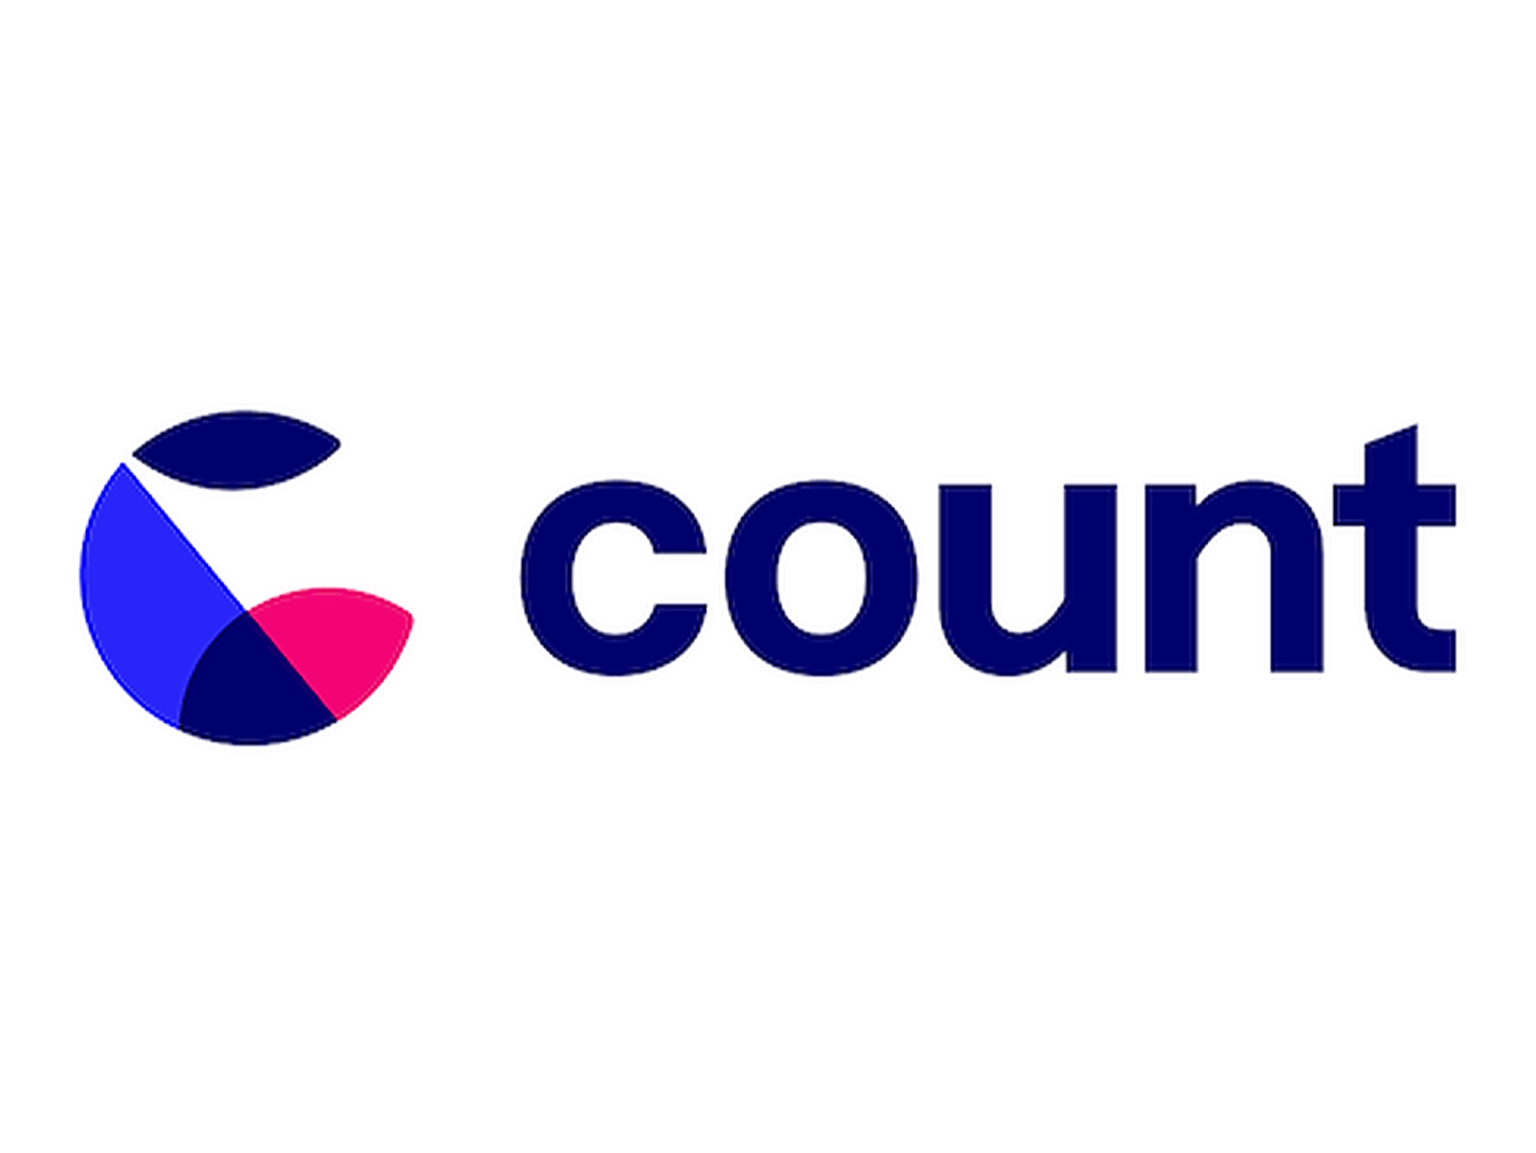 This cohort is only possible thanks to the support of Count.co who made their tool available to us!